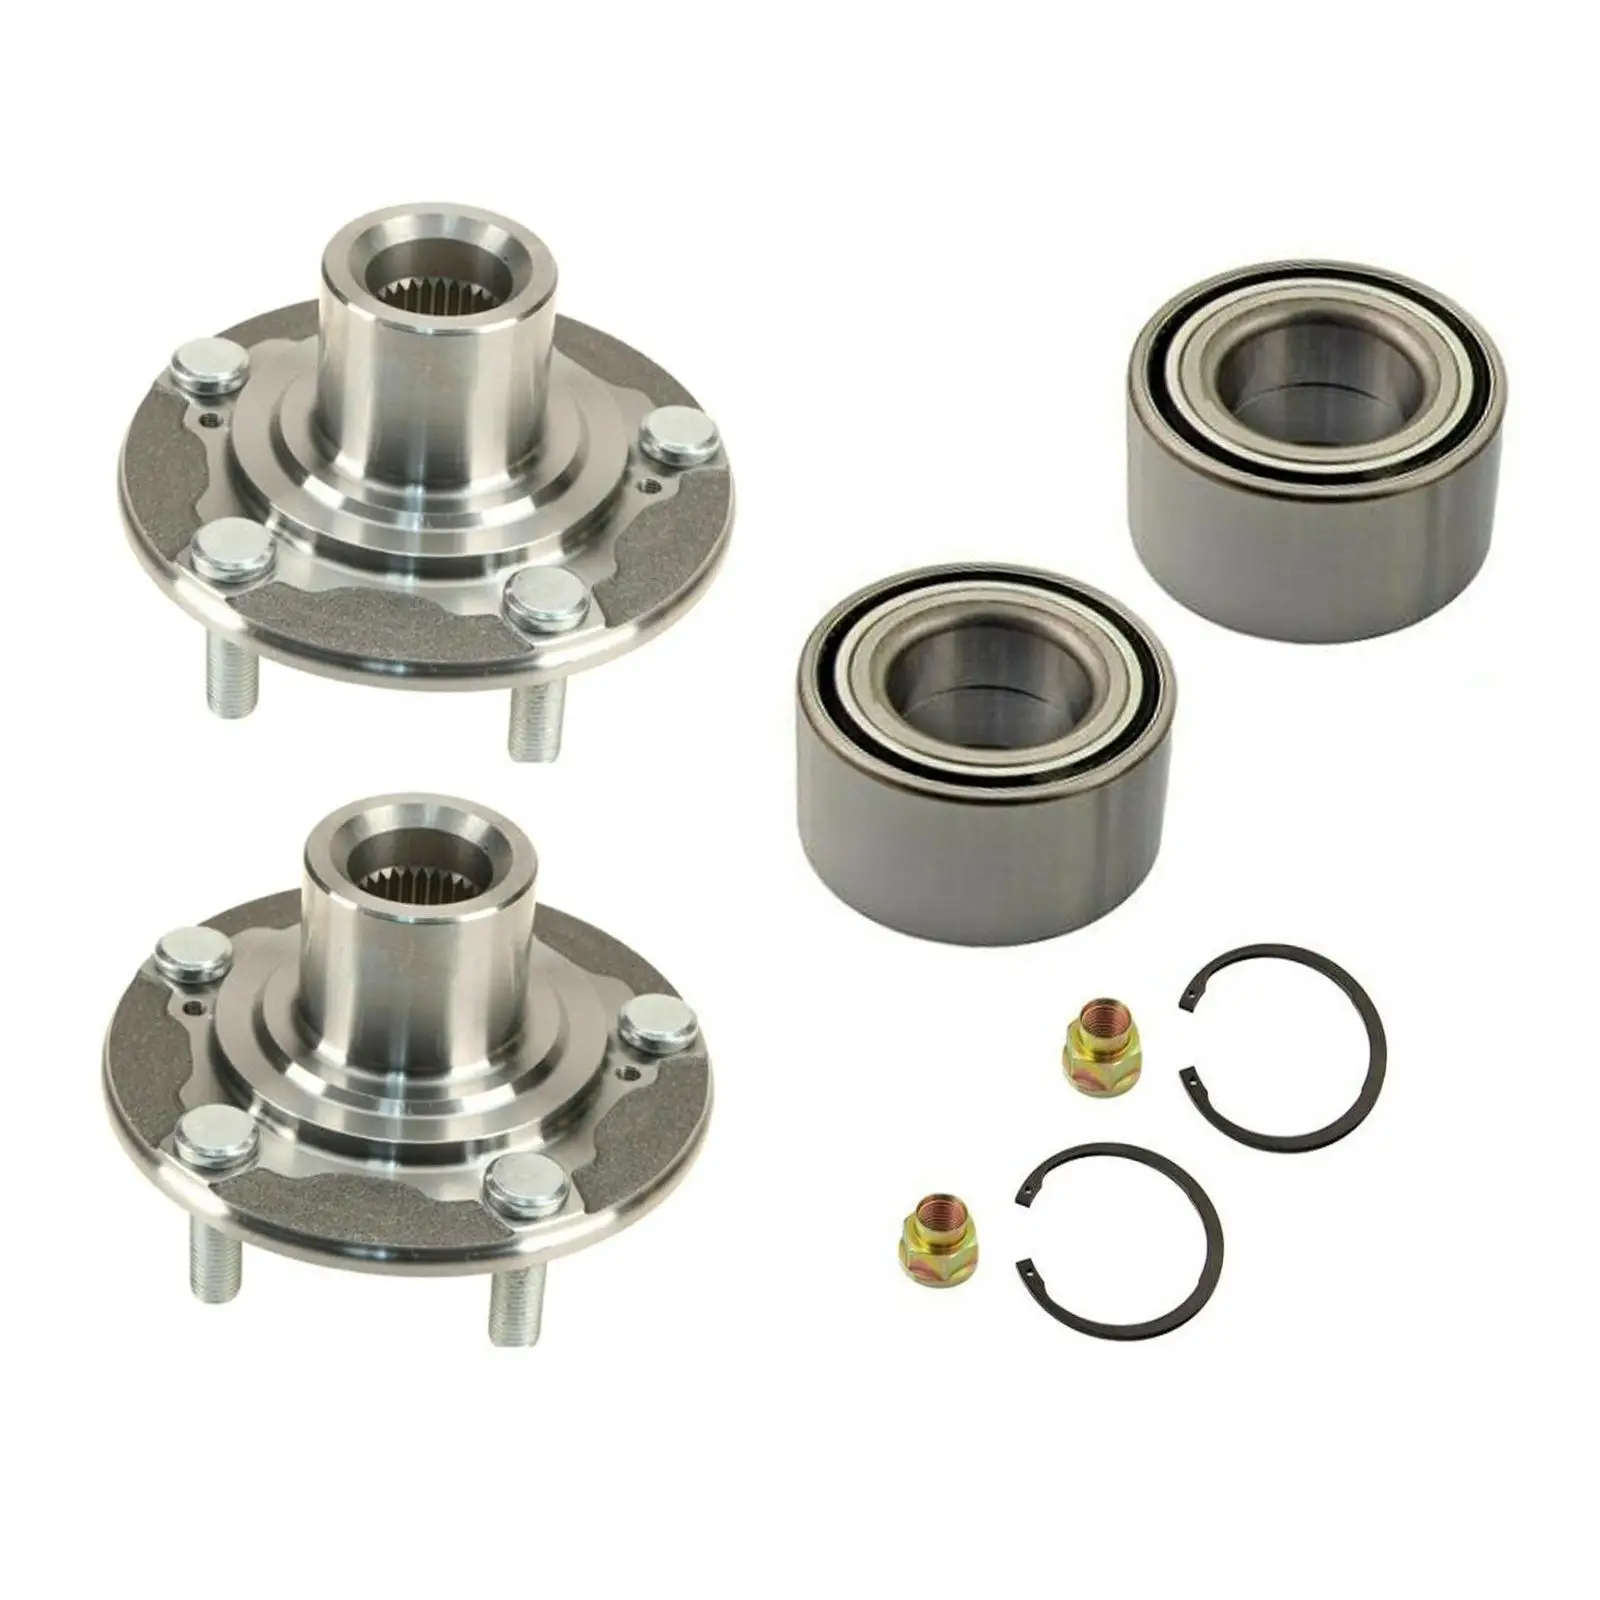 2x Front Wheel Hub and Bearing Repair Kits Professional Durable Easy to Install Spare Parts Left and Right for Honda Accord